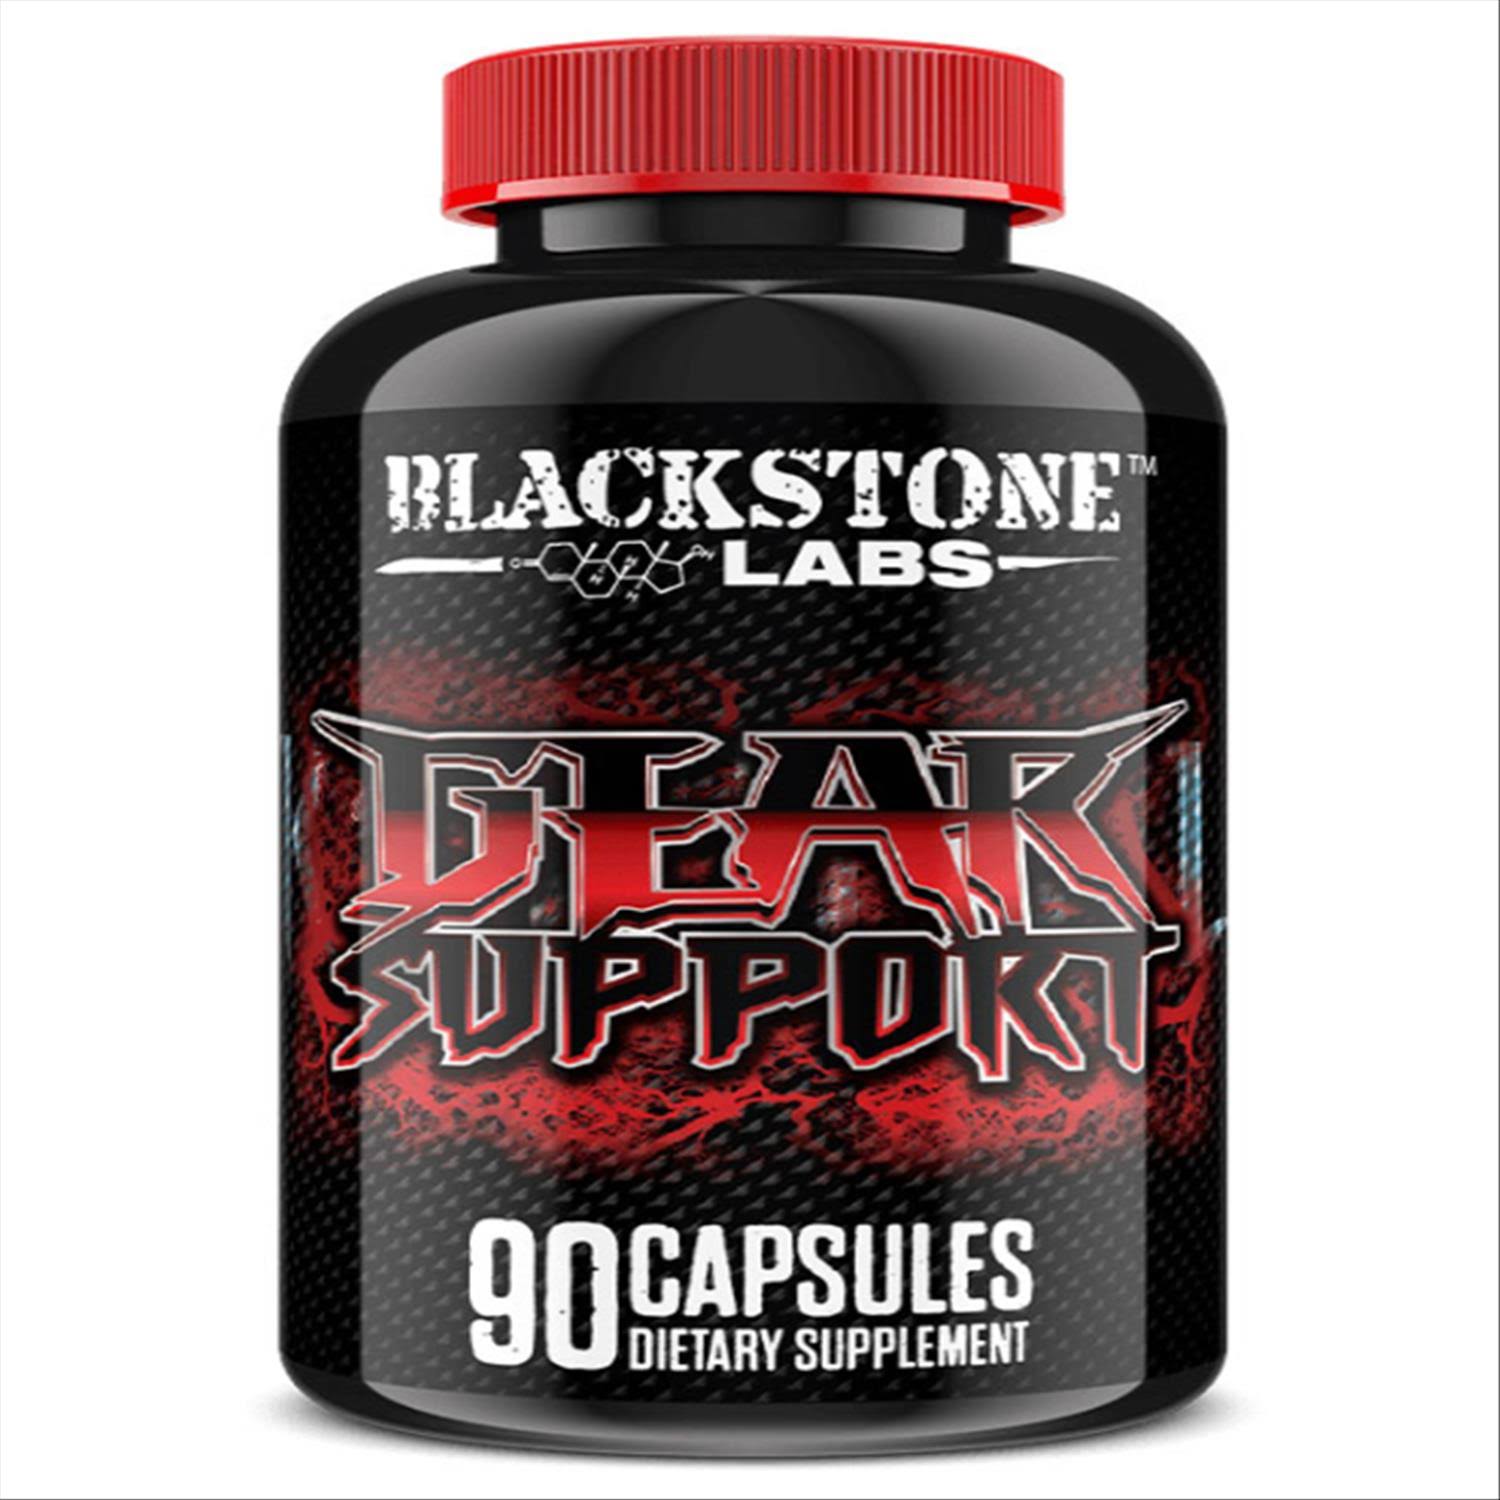 Blackstone Labs Gear Support Capsules - 90ct